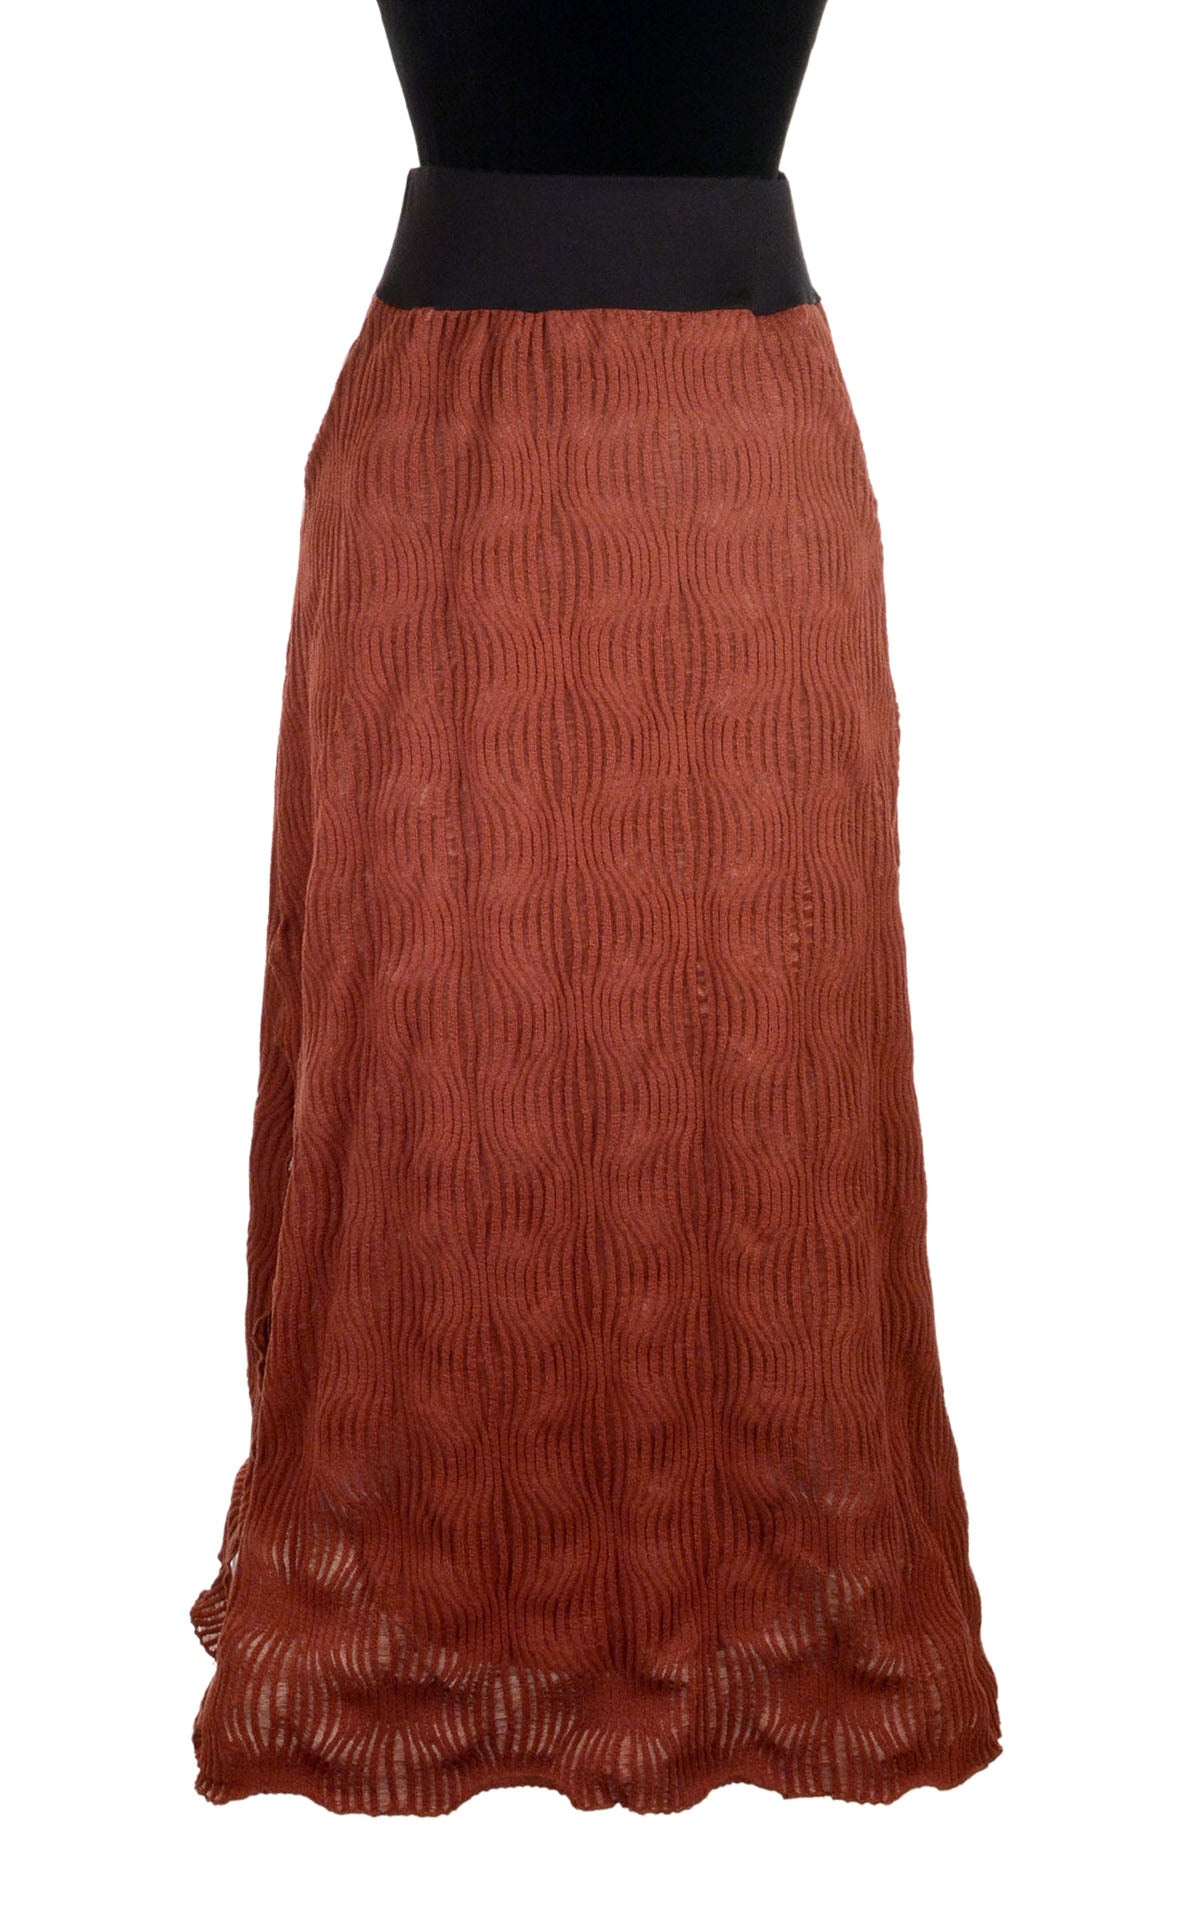 Product photo of A-Line Skirt in Burnt Sienna, from the LYC/Pandemonium Seattle Fractal Collection. Handmade in Seattle, WA, USA.